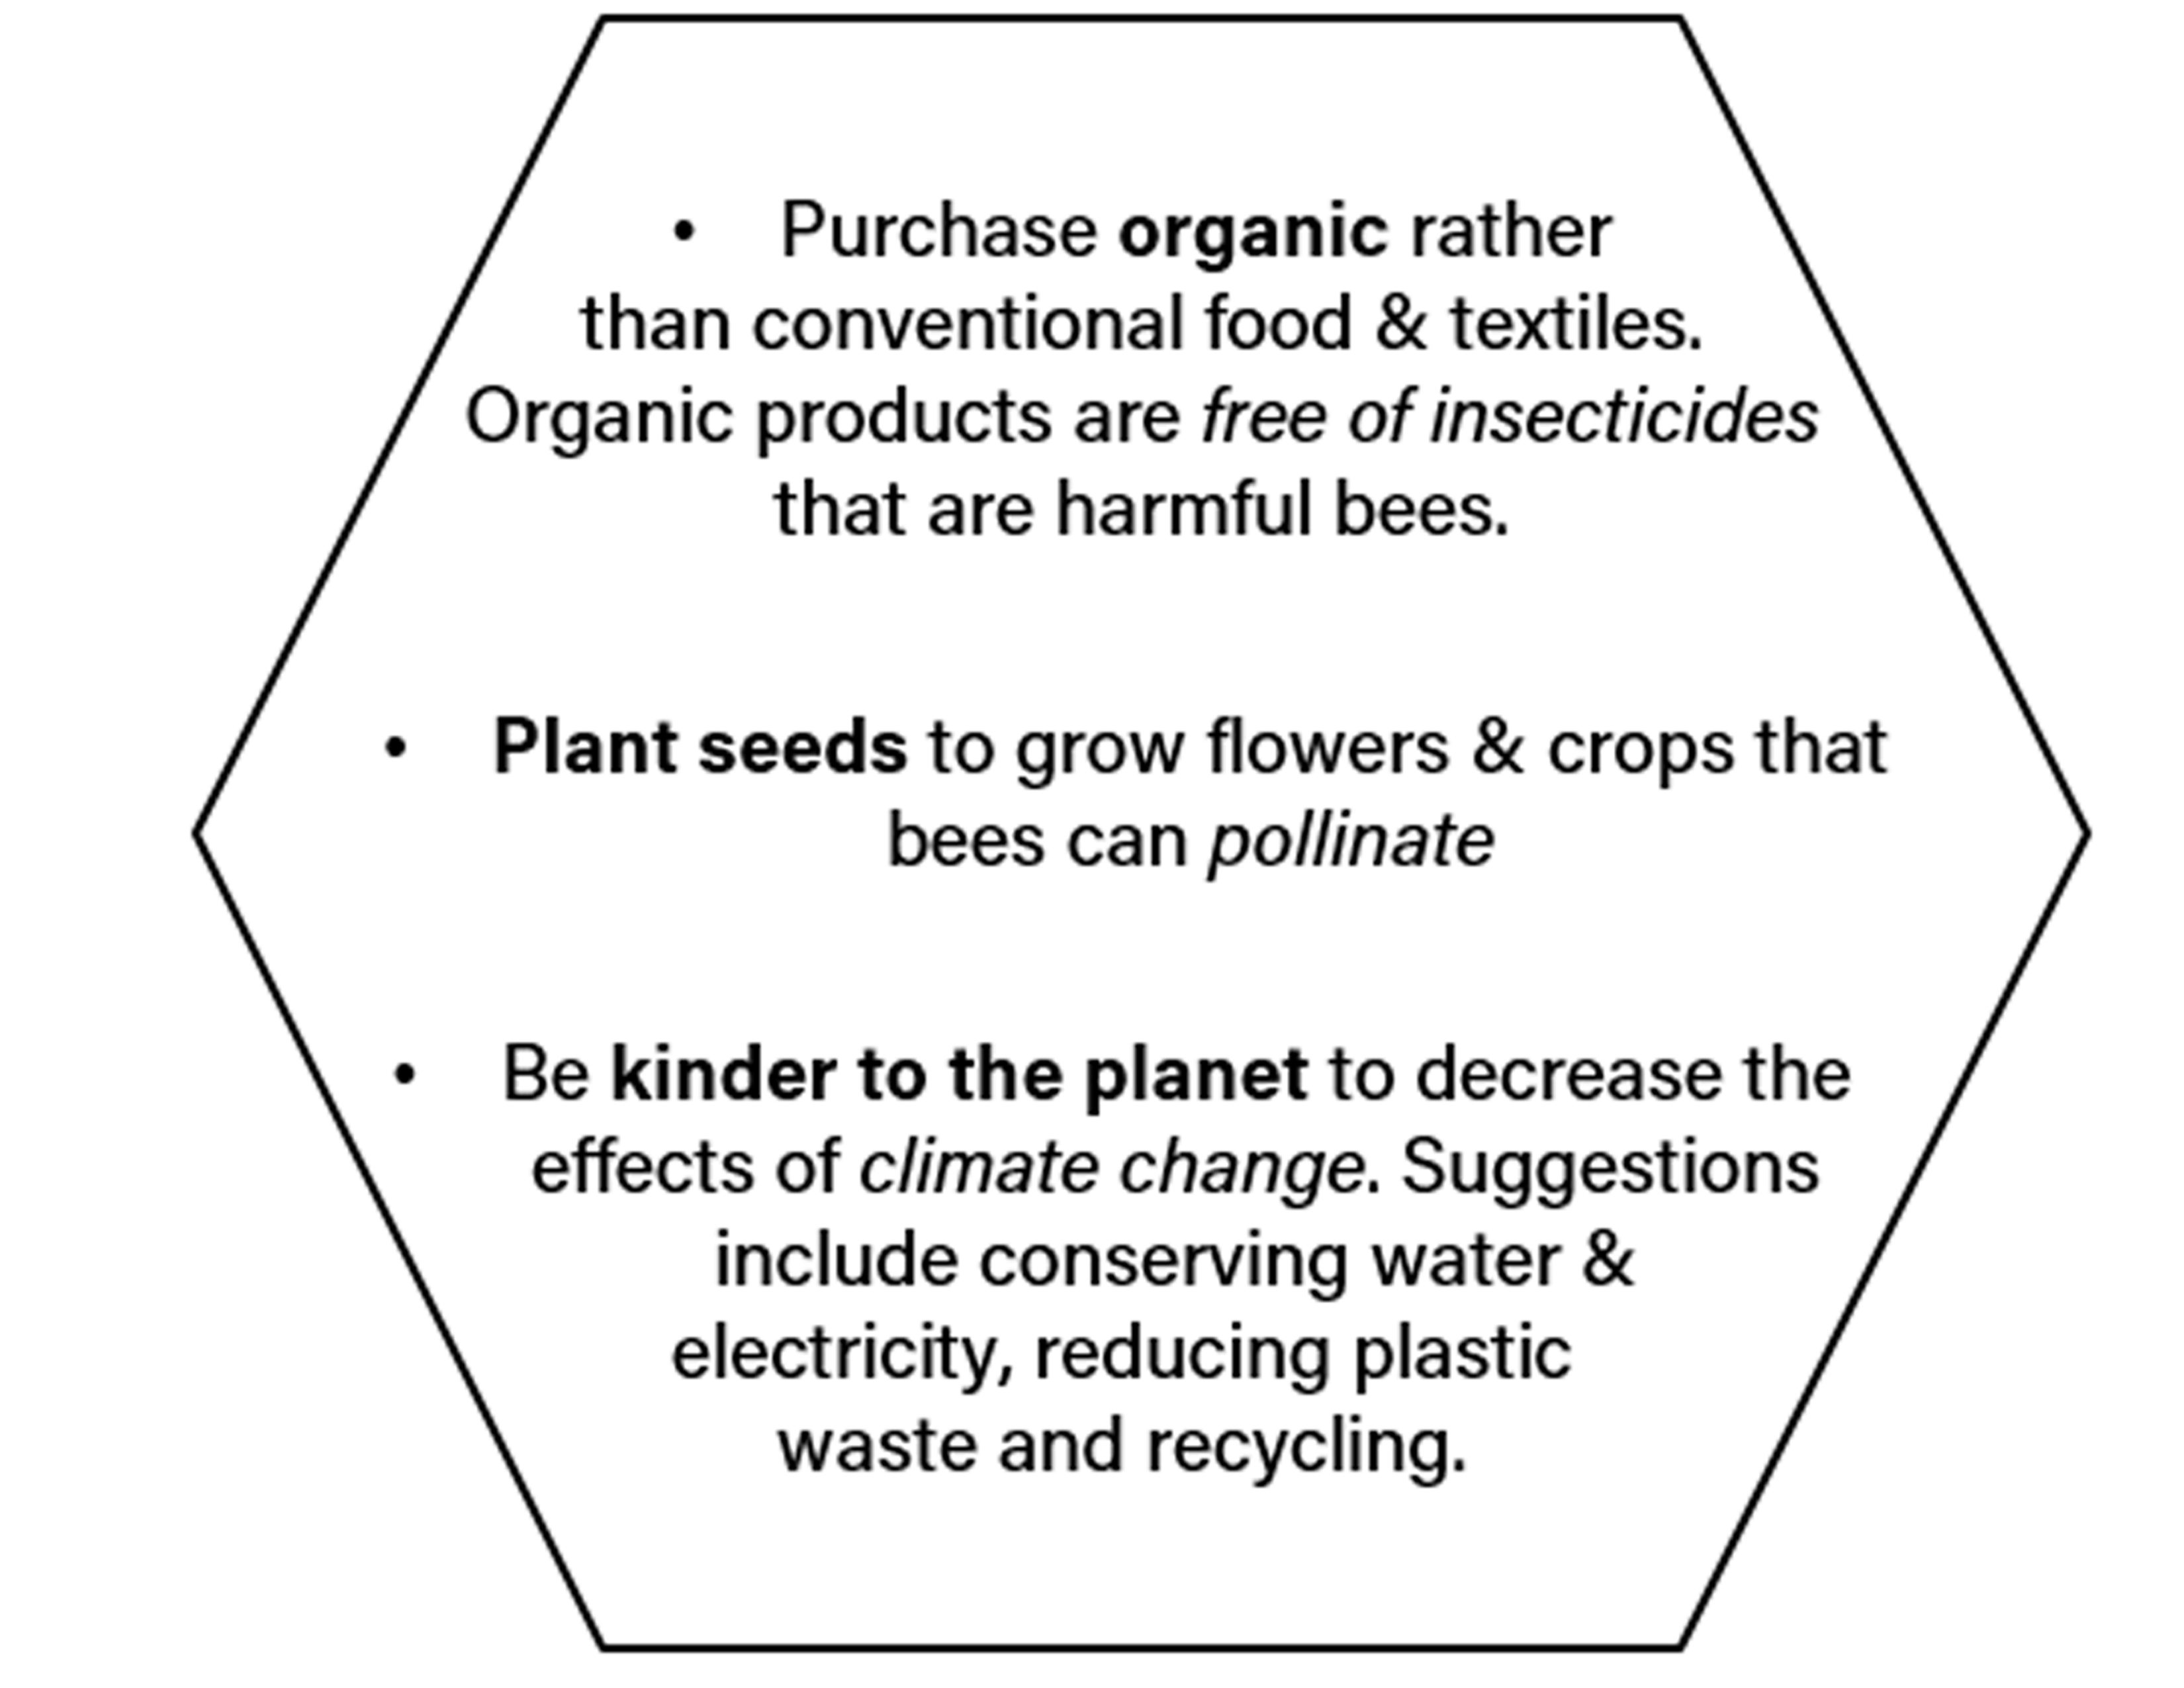 Purchase organic rather than conventional food & textiles. Organic products are free of insecticides that are harmful bees.; Plant seeds to grow flowers & crops that bees can pollinate; Be kinder to the planet to decrease the effects of climate change. Suggestions include conserving water & electricity, reducing plastic wate, recycling, and more.